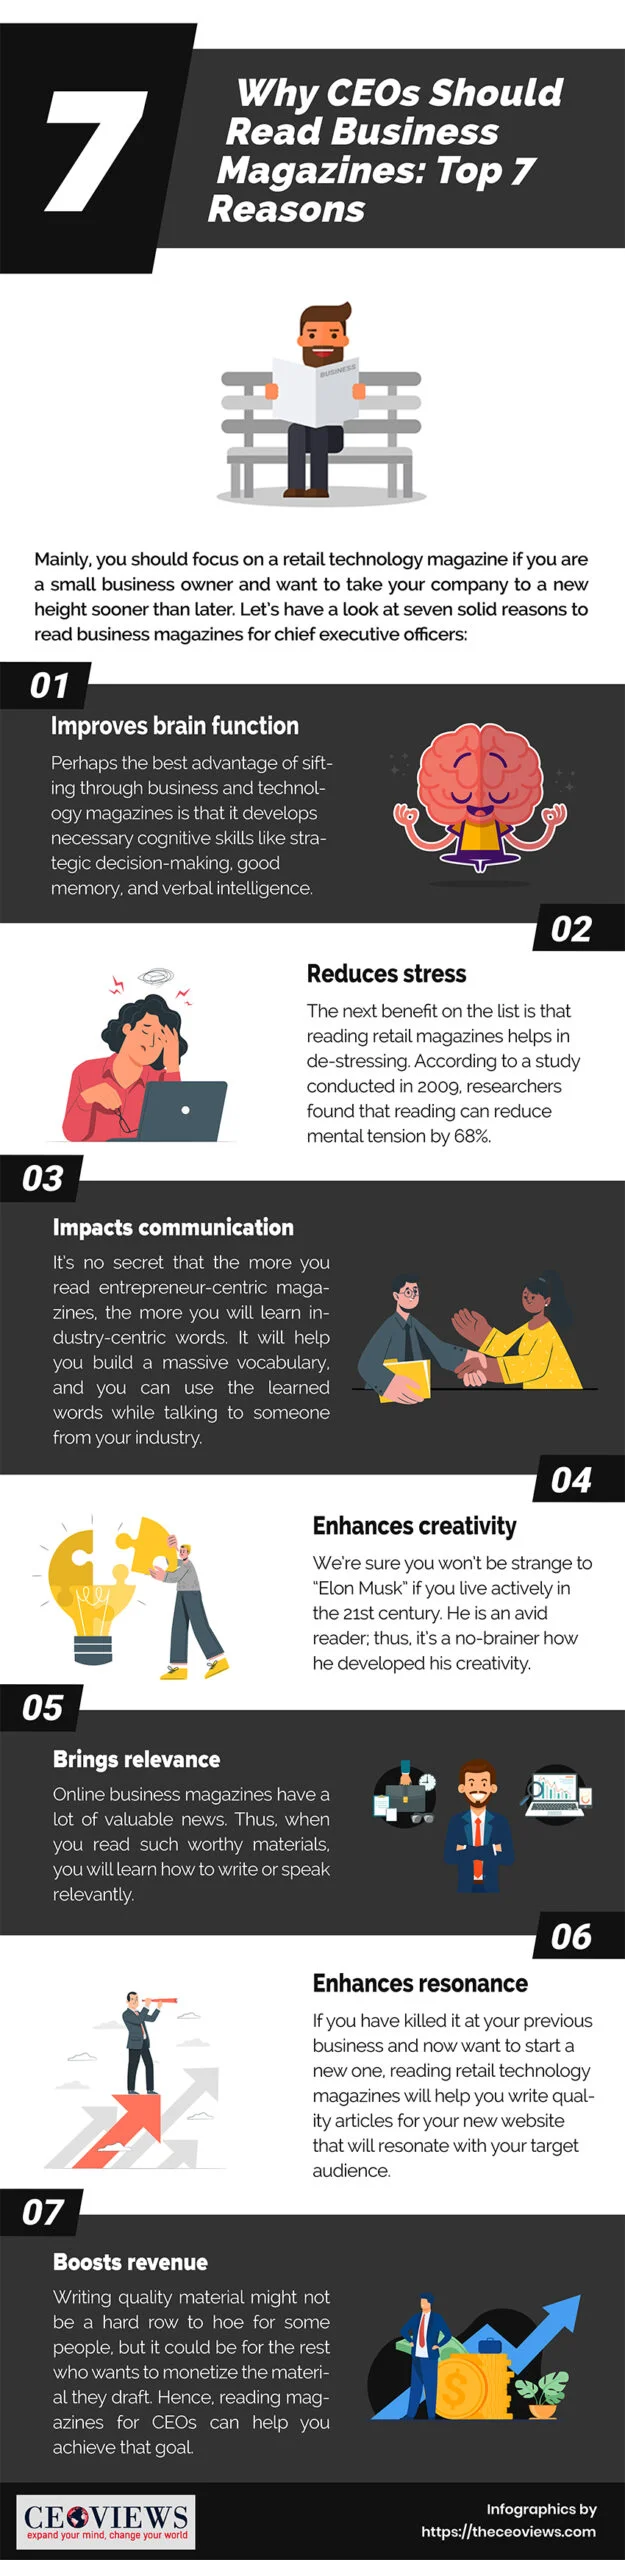 Business top 7 Reason Infographic